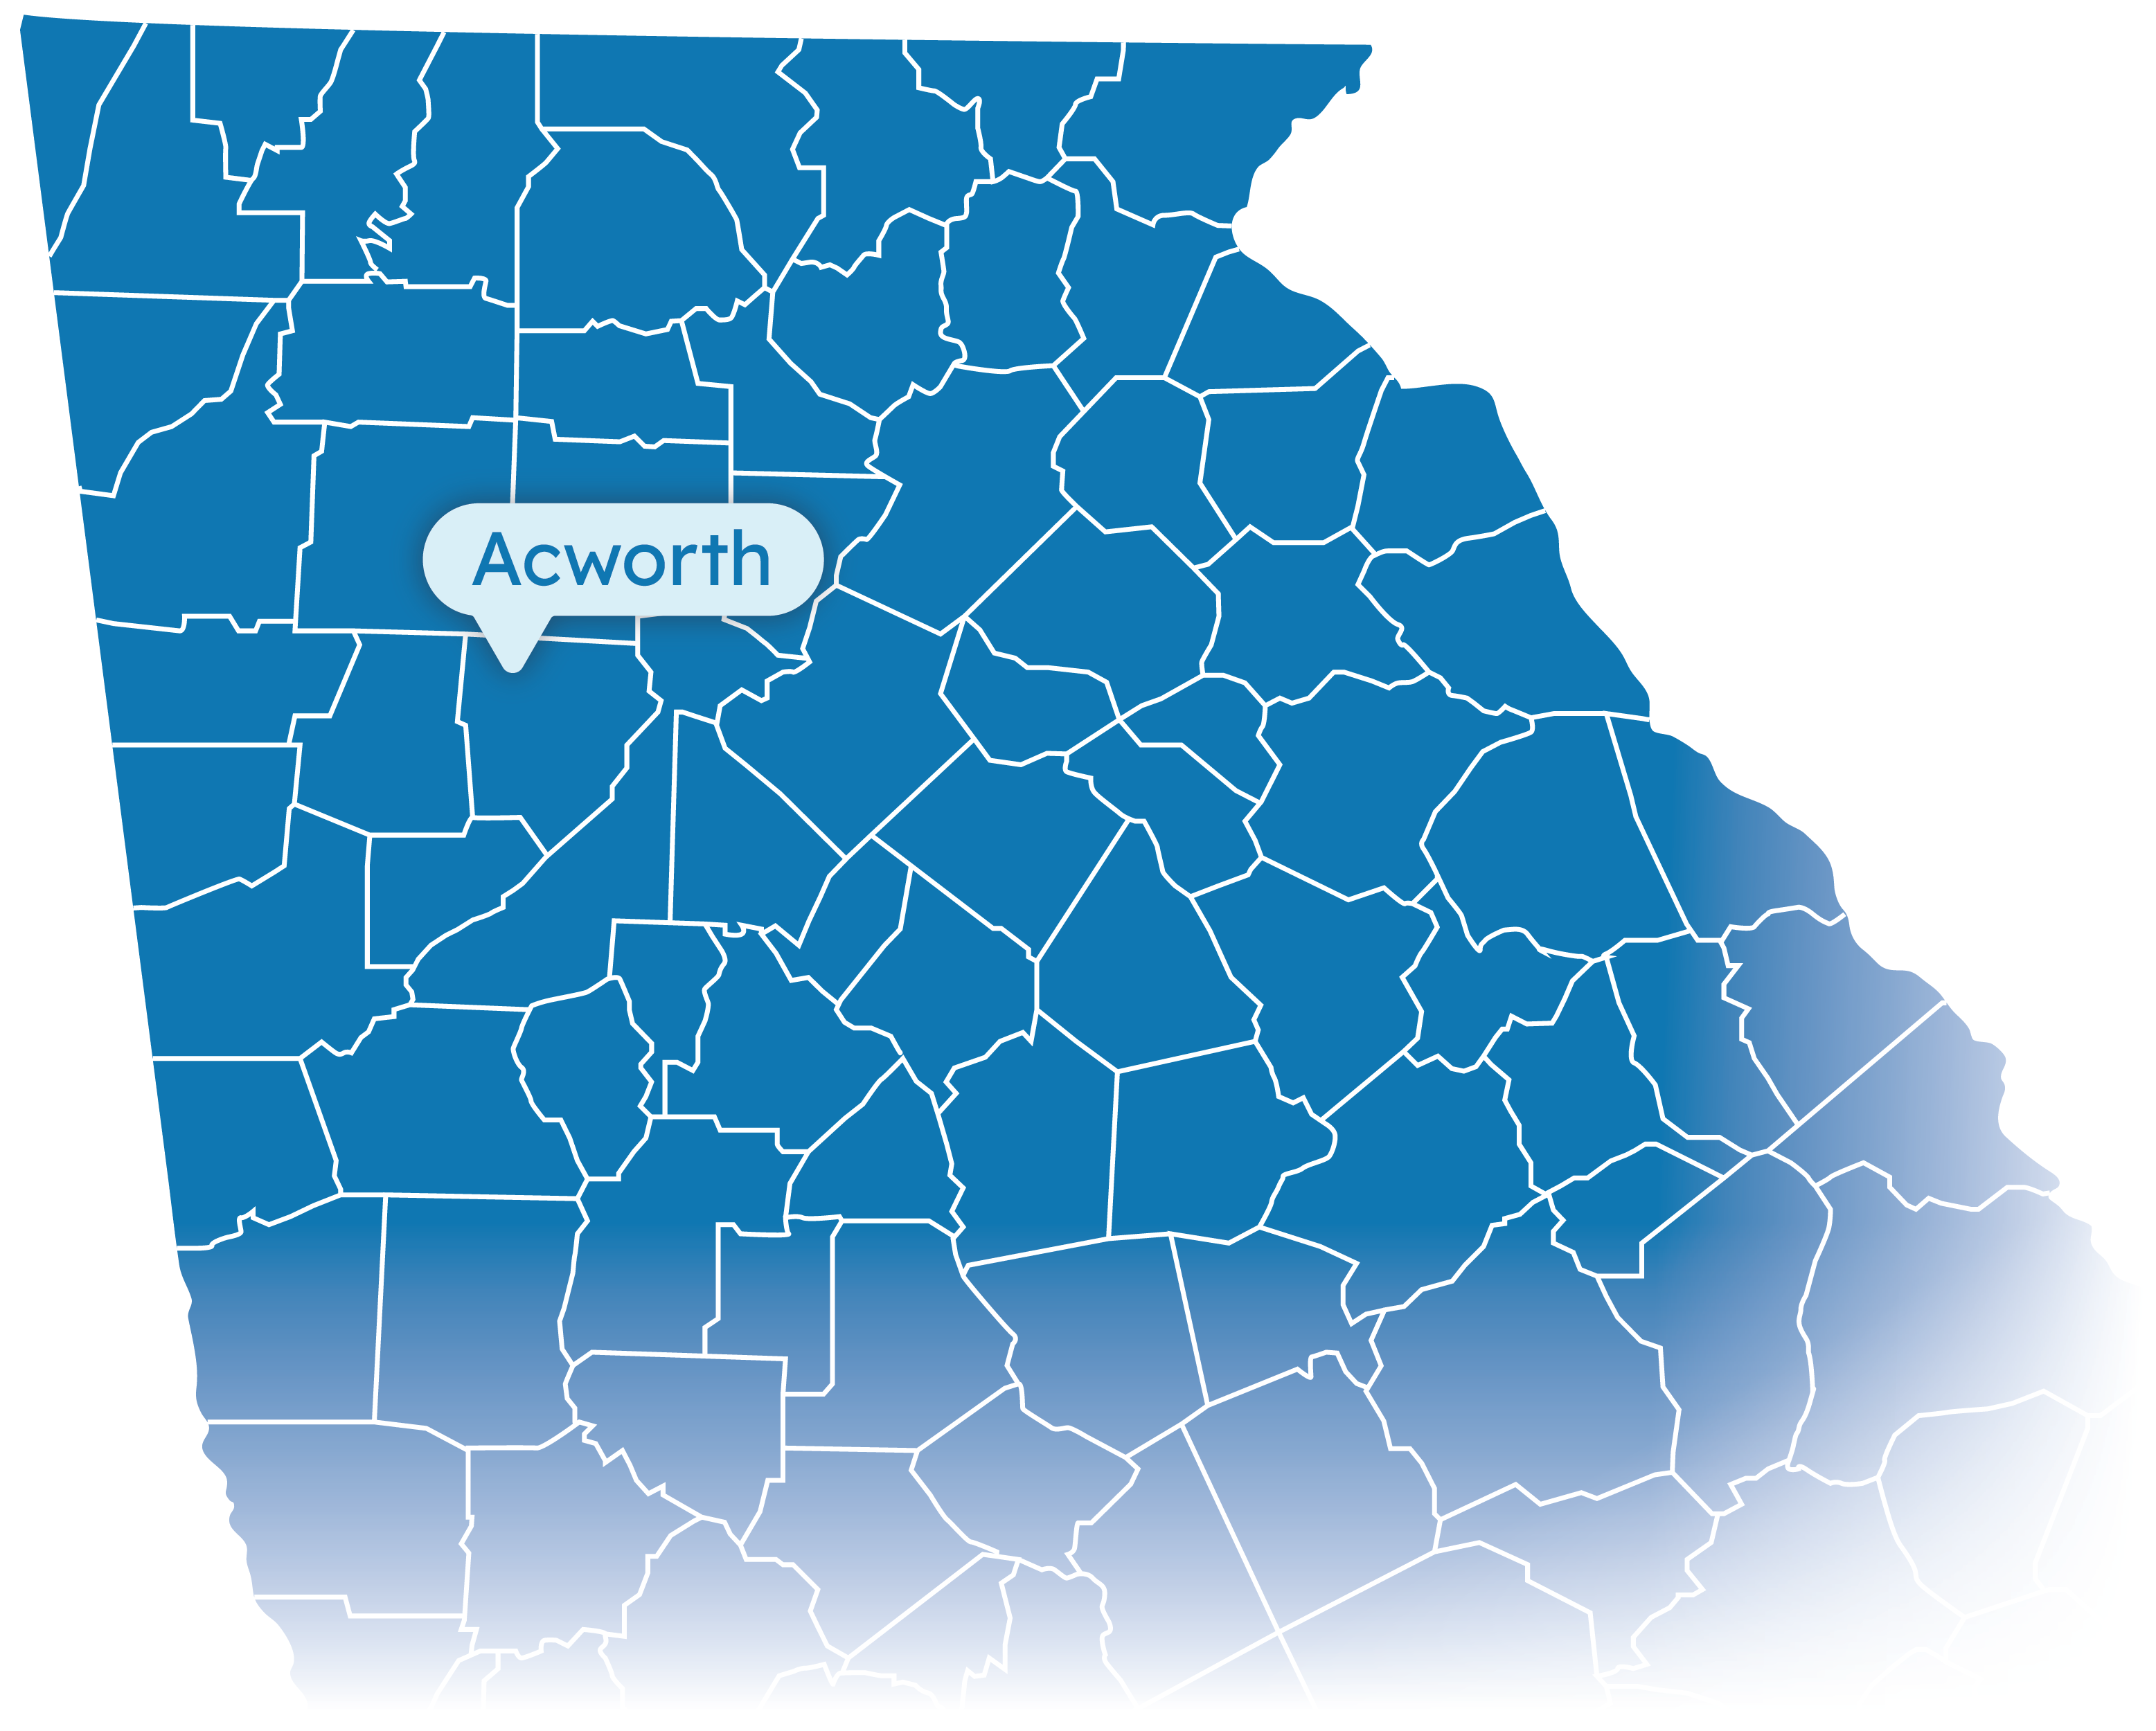 Map of Georgia with Acworth higlighted